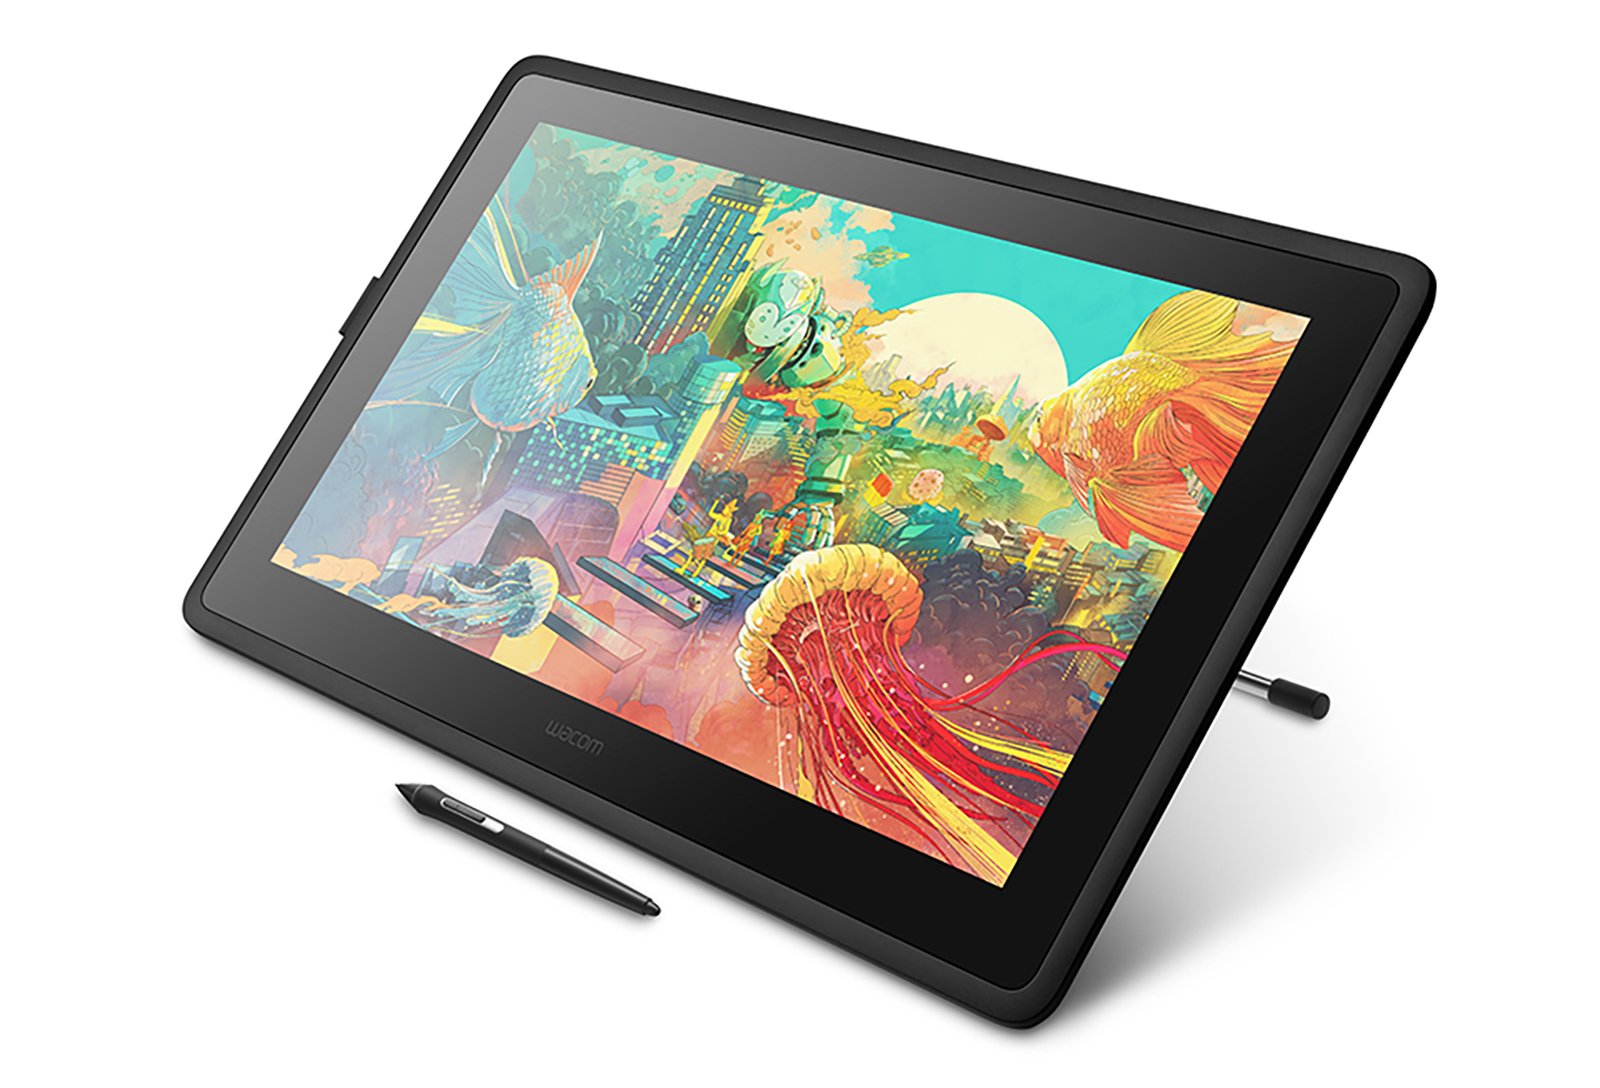 Wacoms Cintiq 22 is an Affordable Pen Display for Budget-Conscious Pros